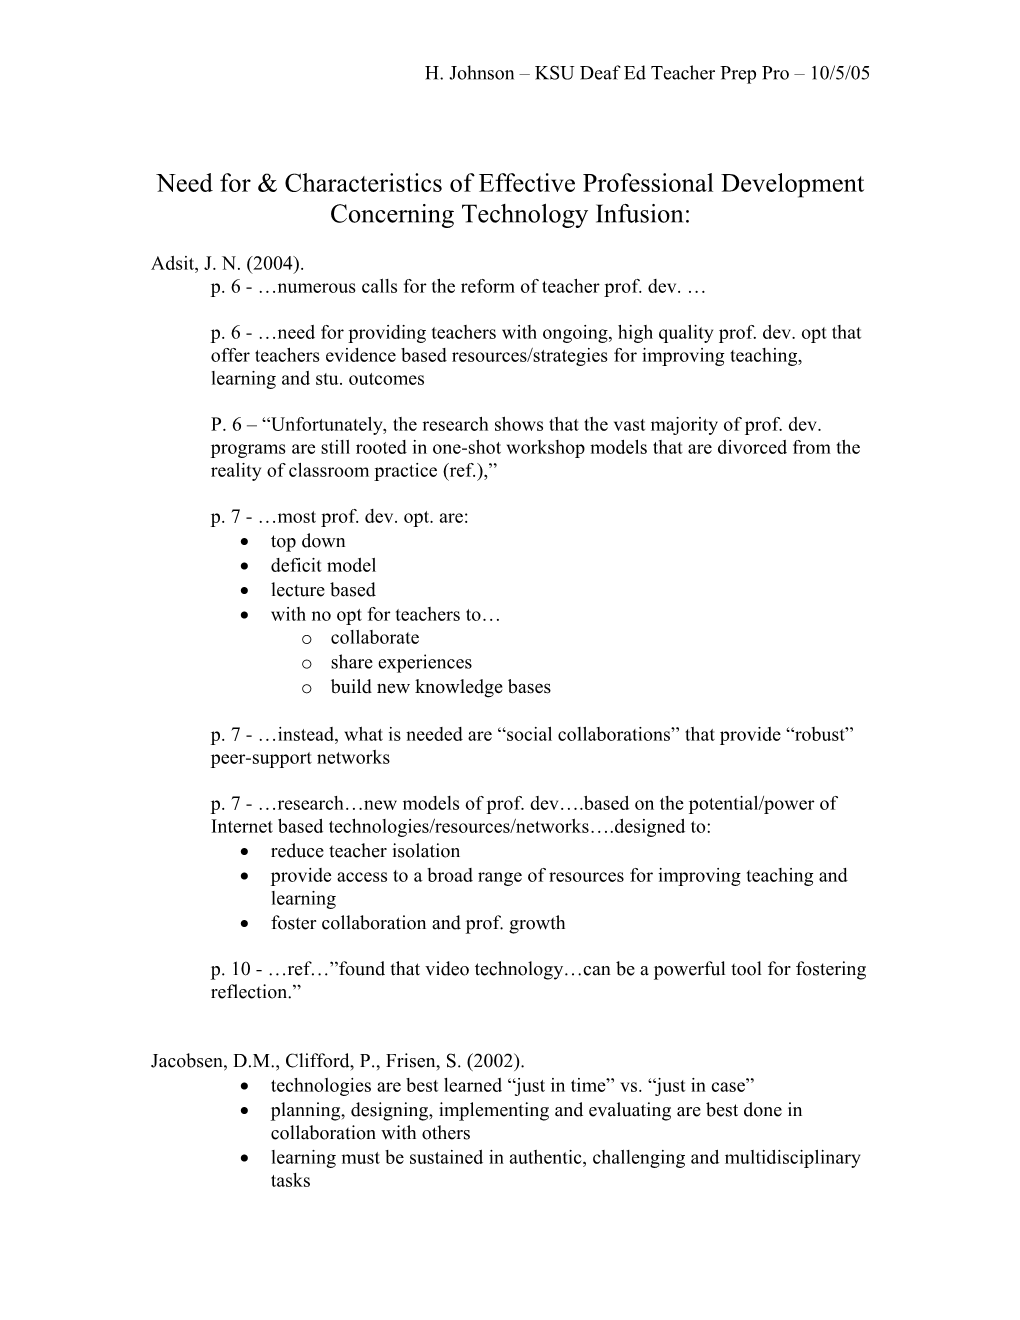 Characteristics of Effective Professional Development Concerning Technology Infusion